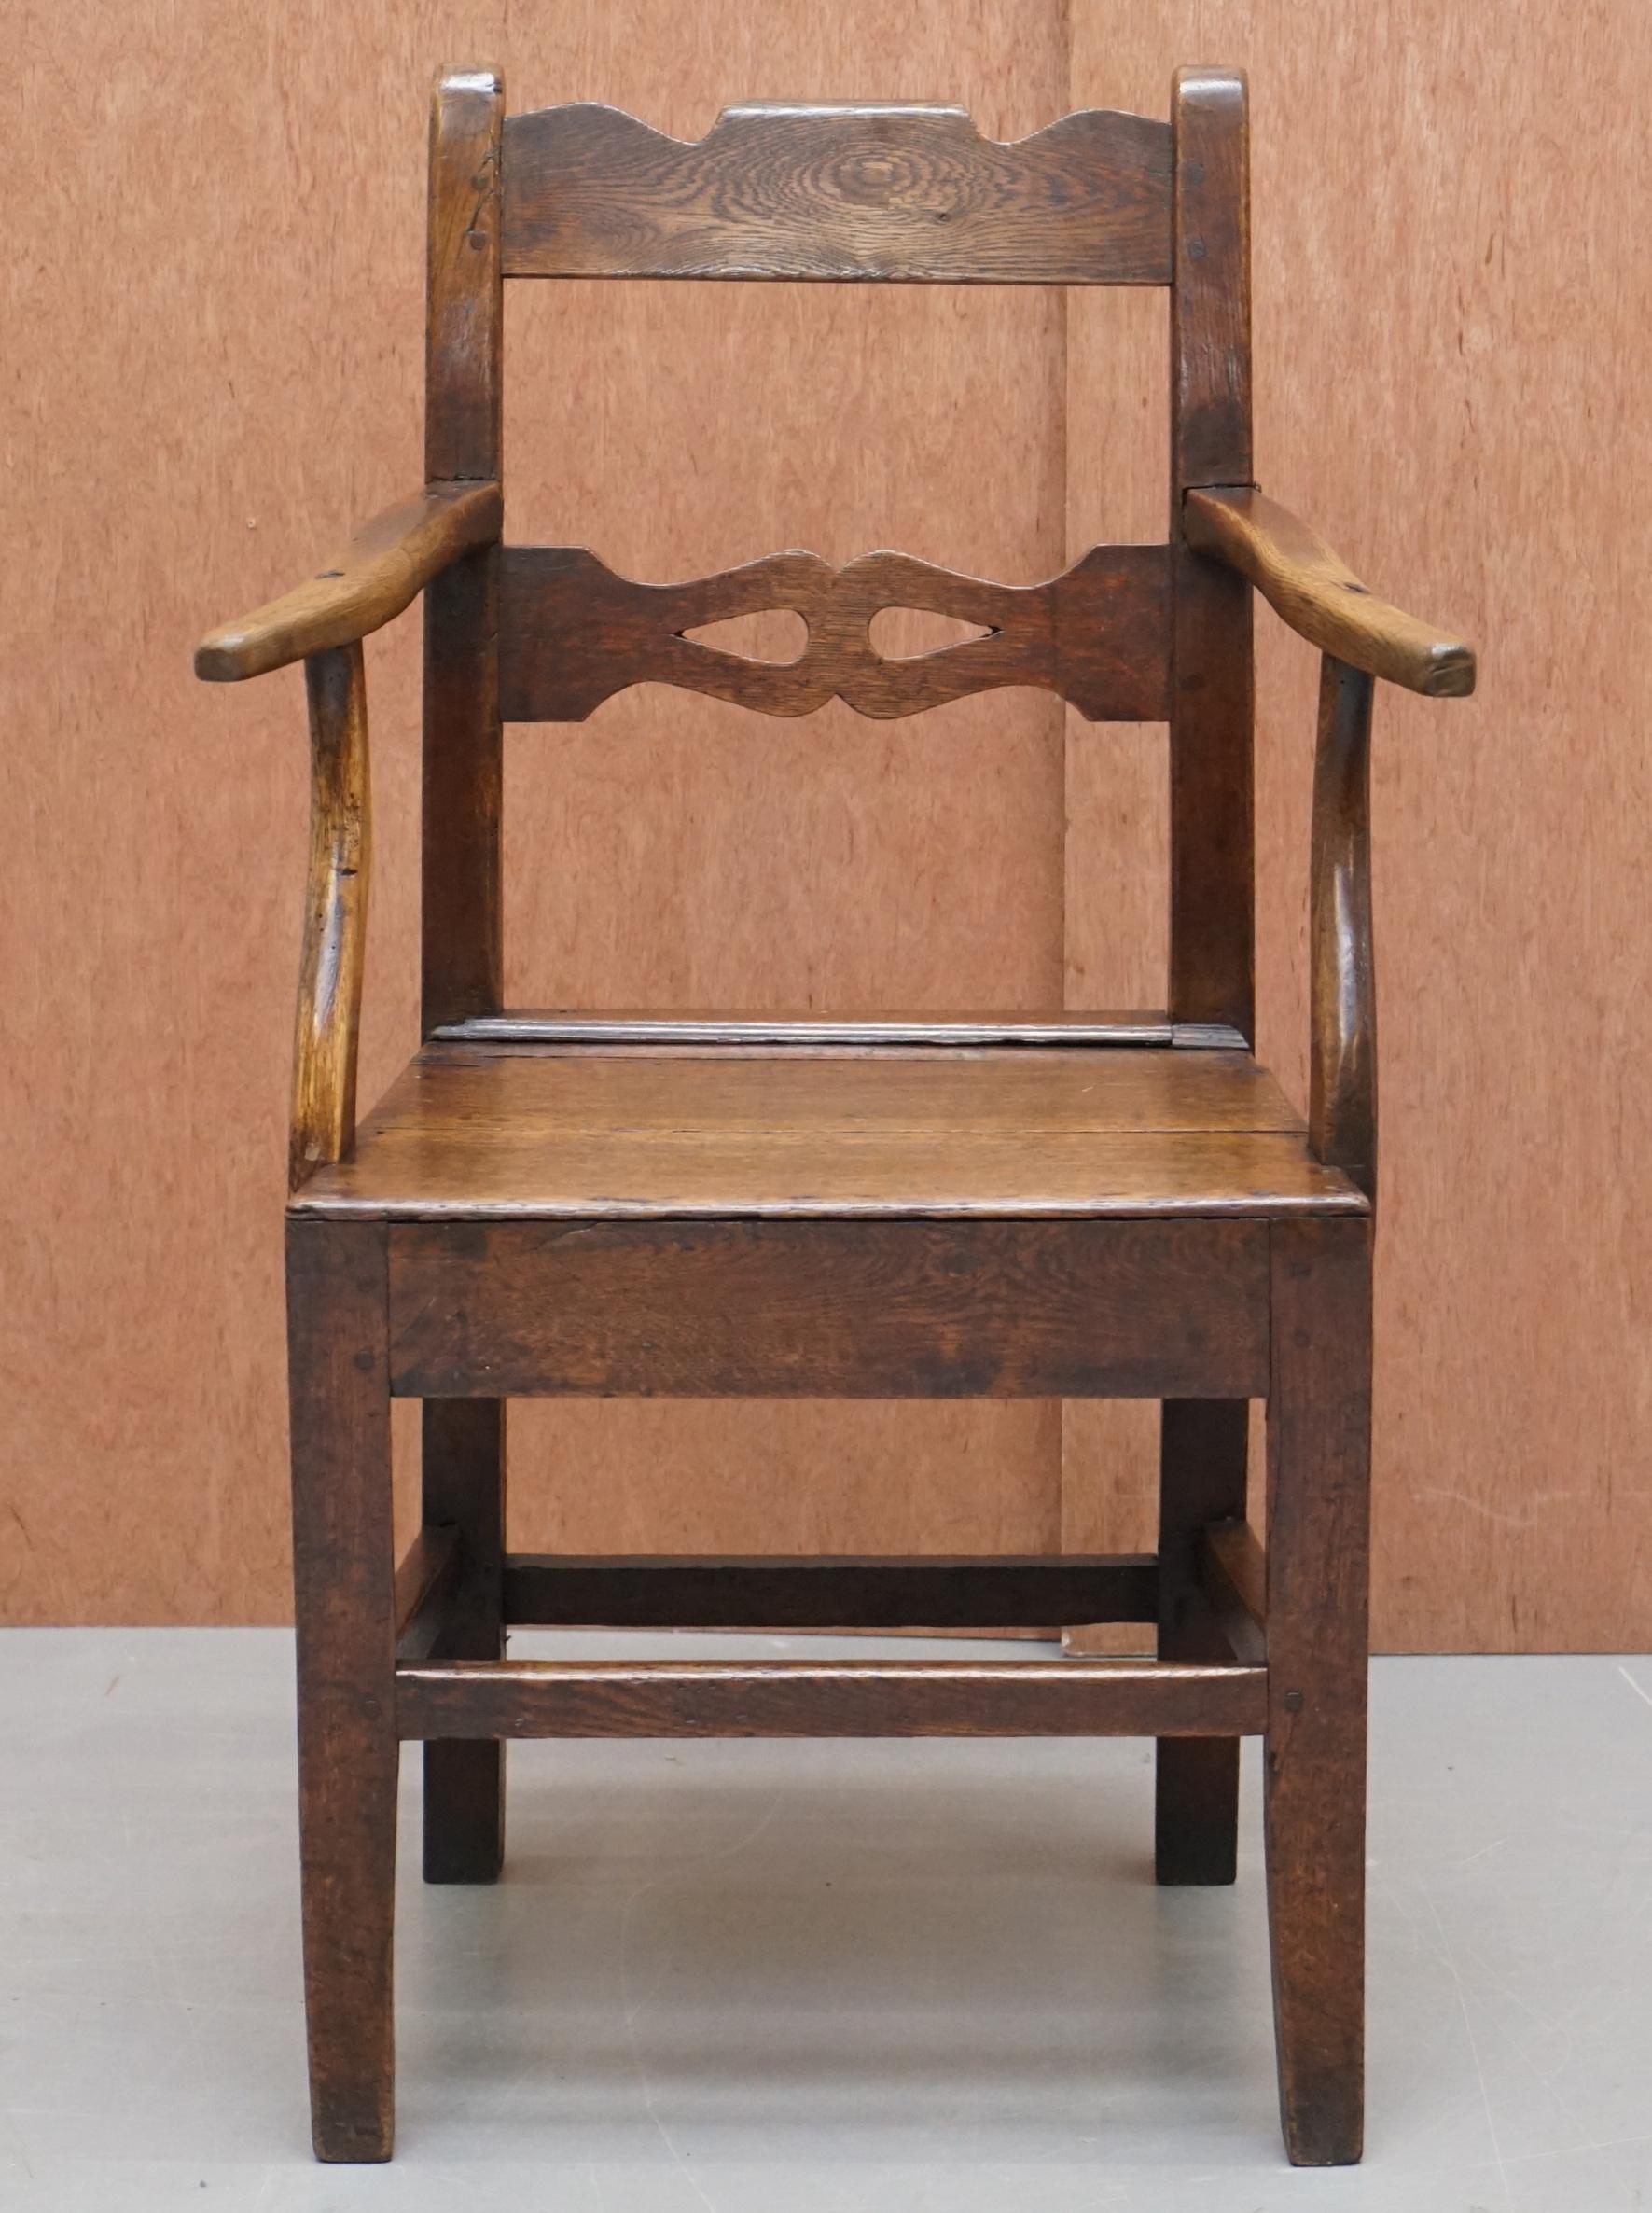 We are delighted to offer for sale this stunning George II circa 1760 oak carver chair with period repairs 

A very good looking and well made chair, it all seems to be original timber including the stretches which have worn gloriously. There are